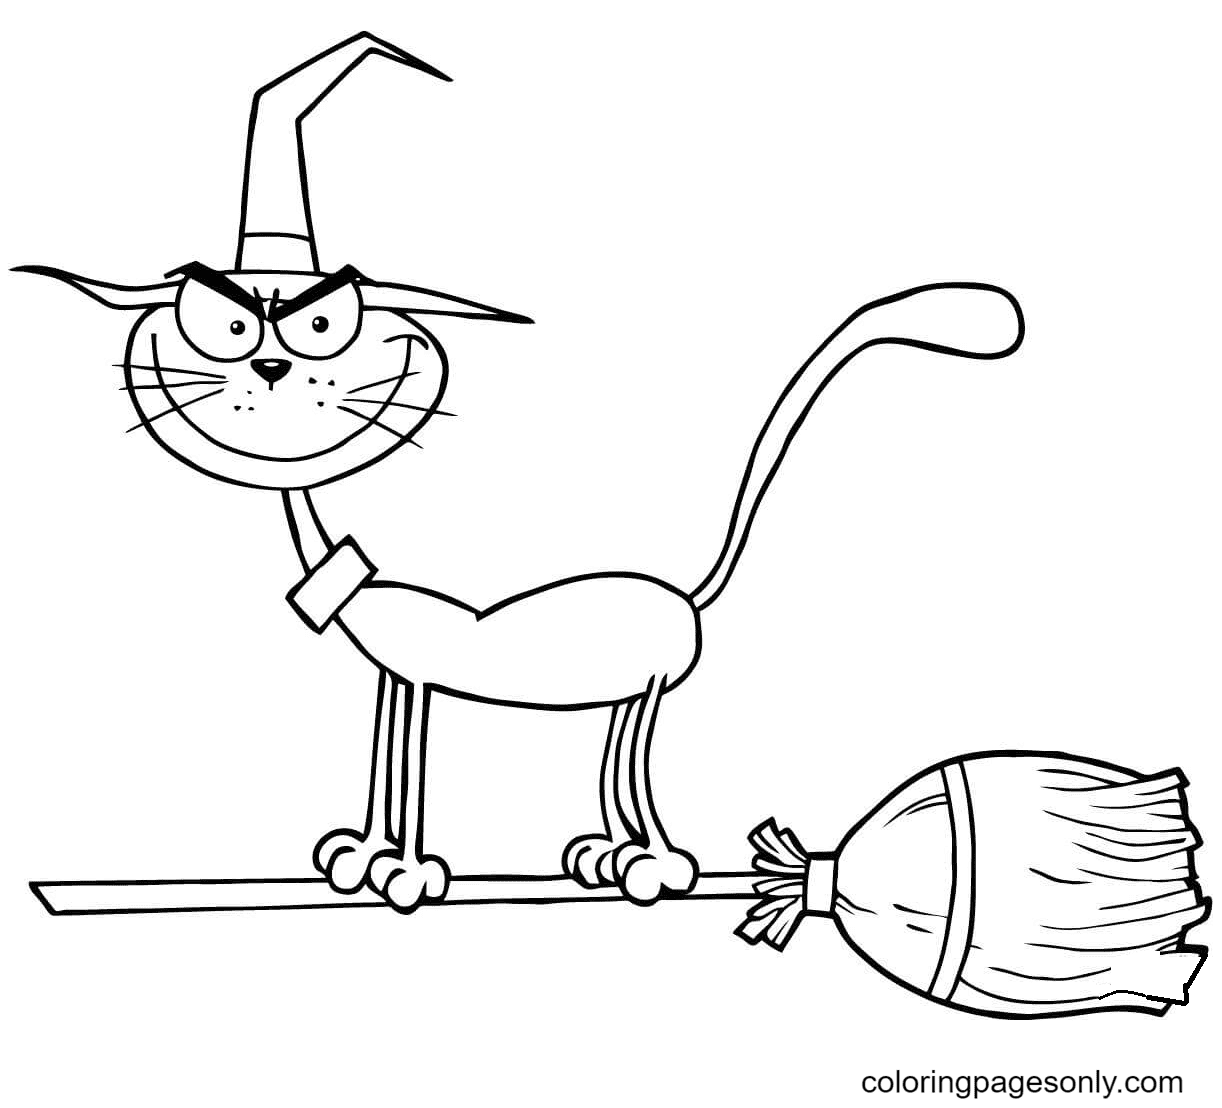 Black Cat Flying a Broom Coloring Page